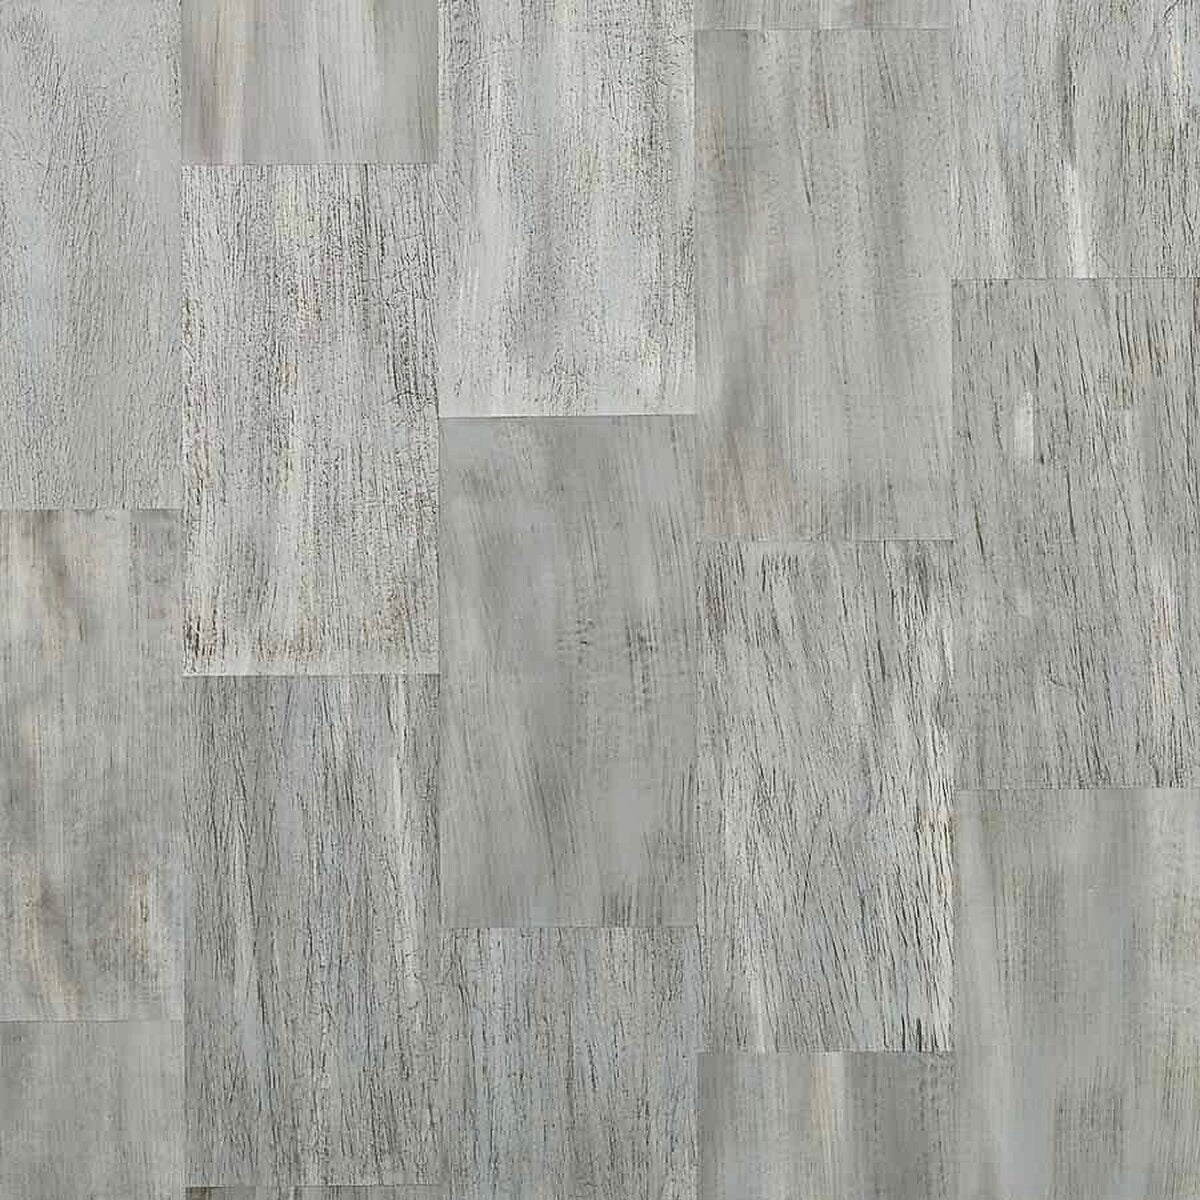 Phillip Jeffries Specialty Ox Horn, Gray Wood Wallcovering, Handmade, PJ 2904 For Sale